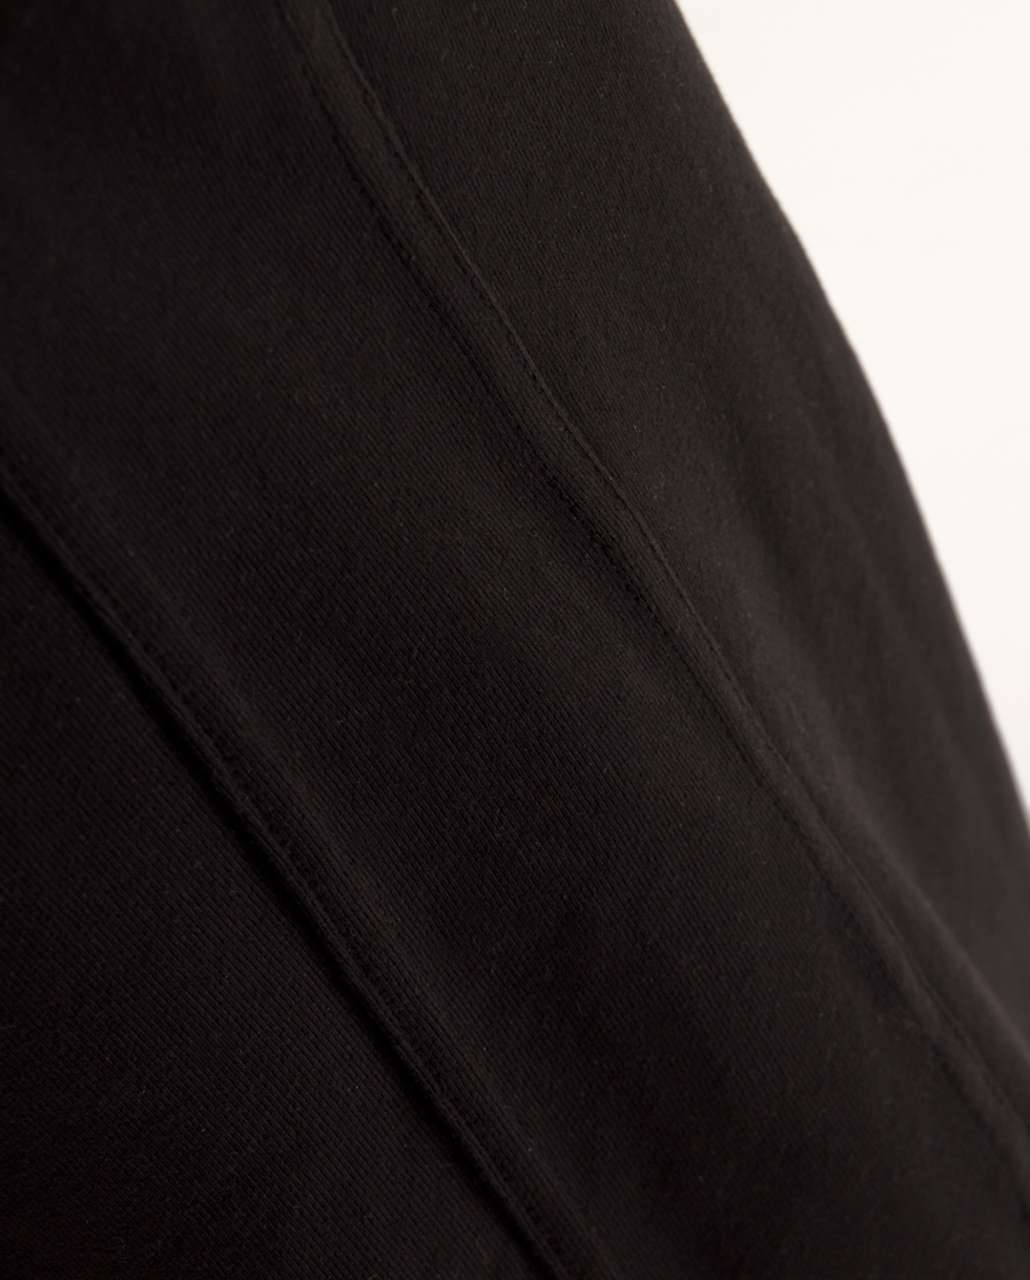 Lululemon Kung Fu Pant (Tall) - Black (First Release)